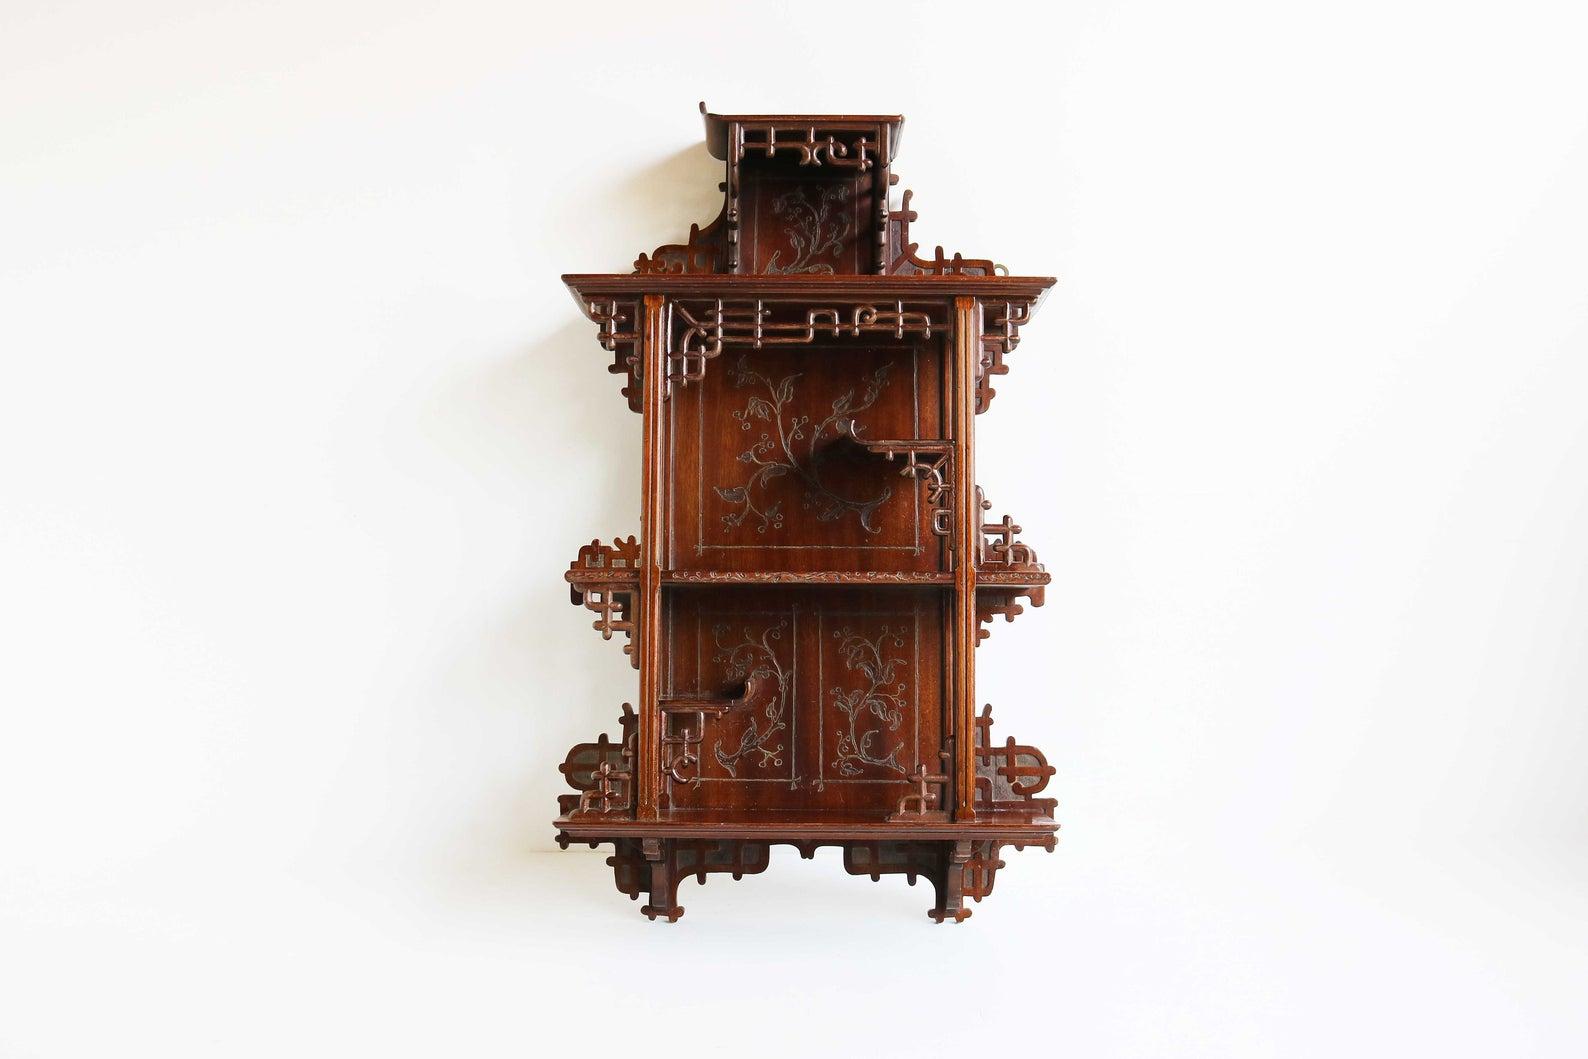 Gorgeous Antique mahogany wall cabinet etagere wall shelf display rack Japanese Chinese woodCarved 1890 1900 art nouveau rare Gabriel Viardot style
Beautiful rare antique display wall shelf in mahogany. This one of a kind very hard to find 19th